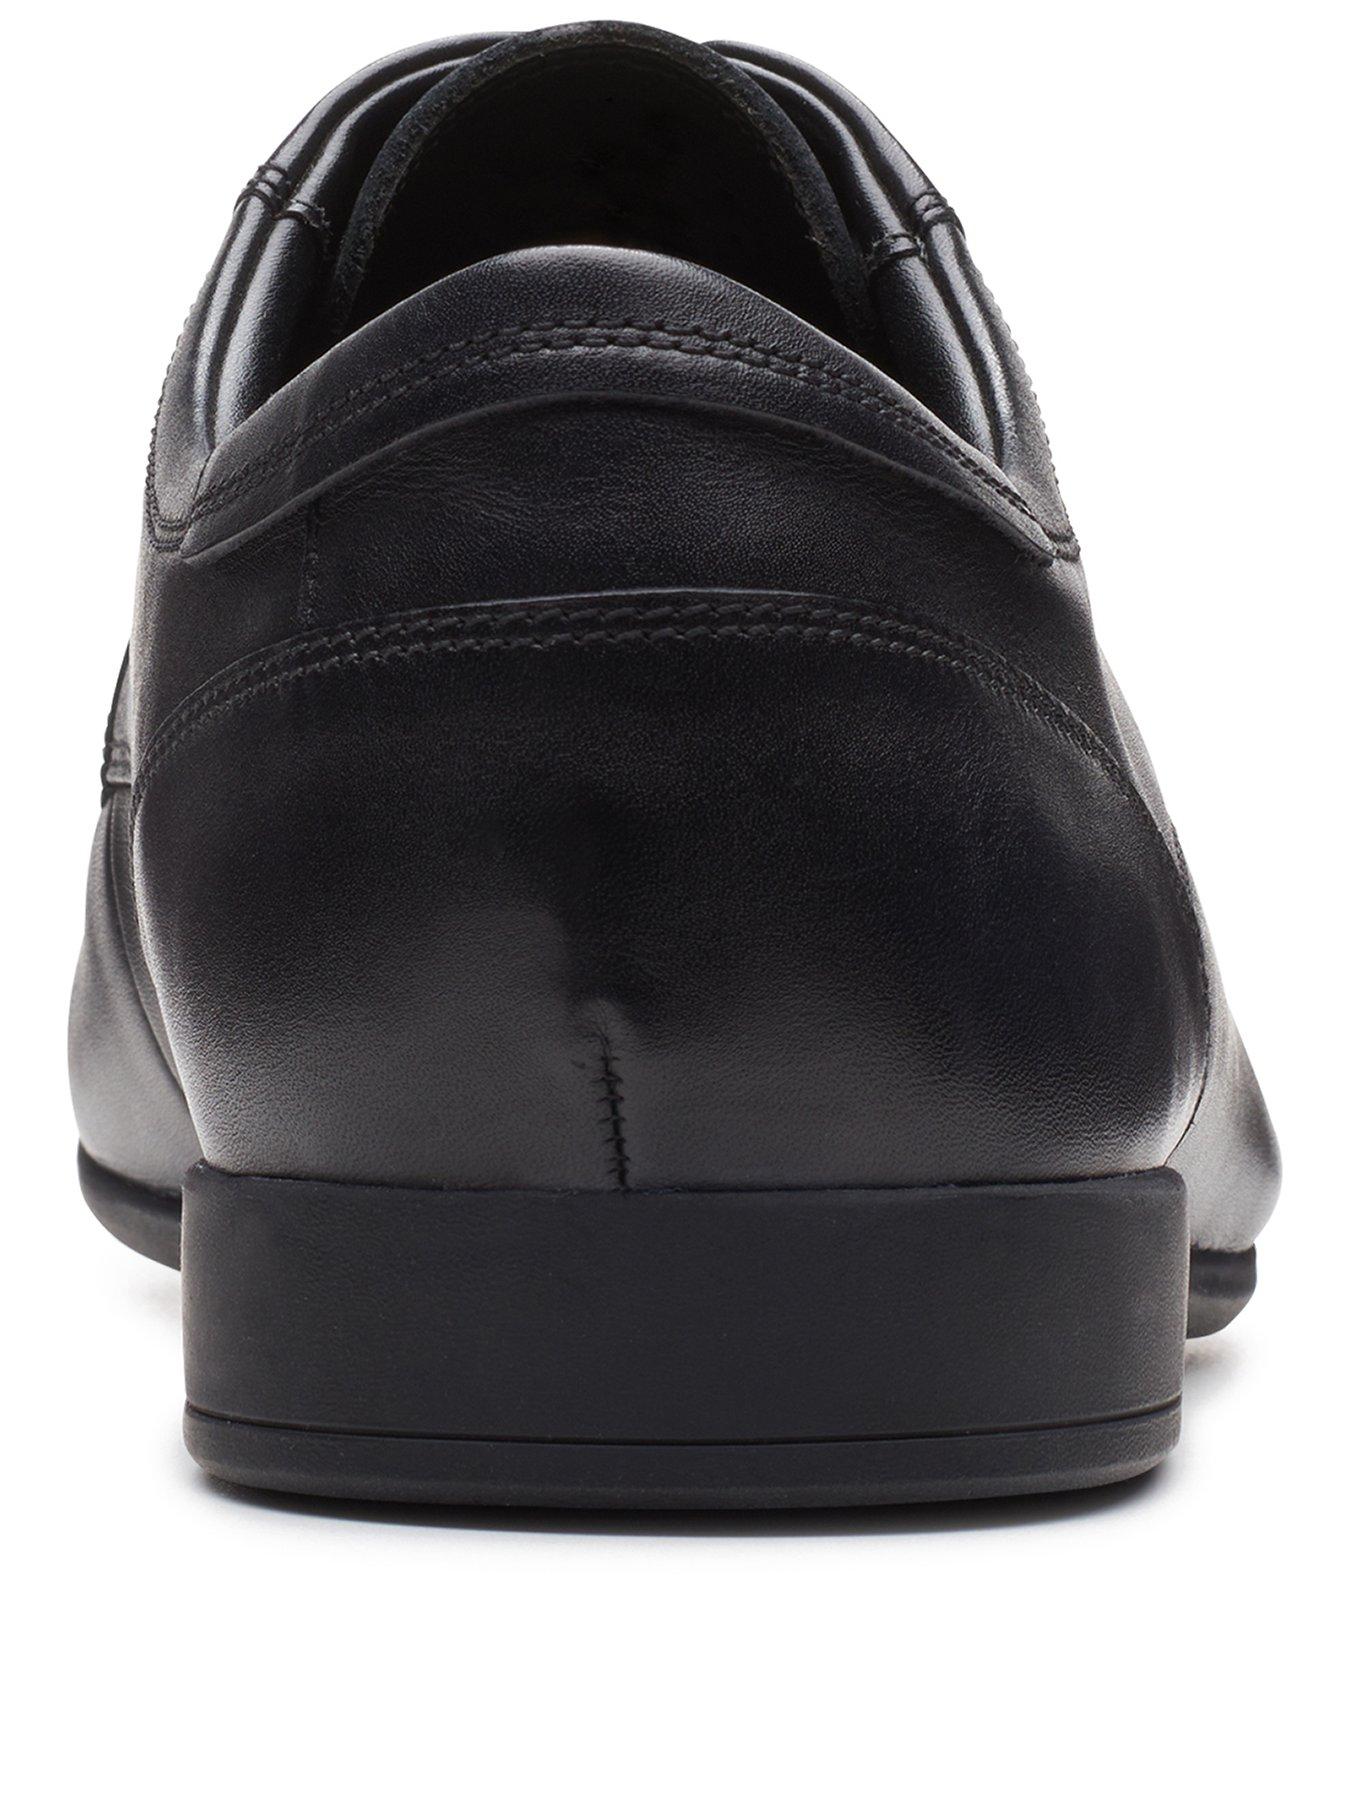 Clarks Sidton Formal Lace Up Shoes - Black | very.co.uk